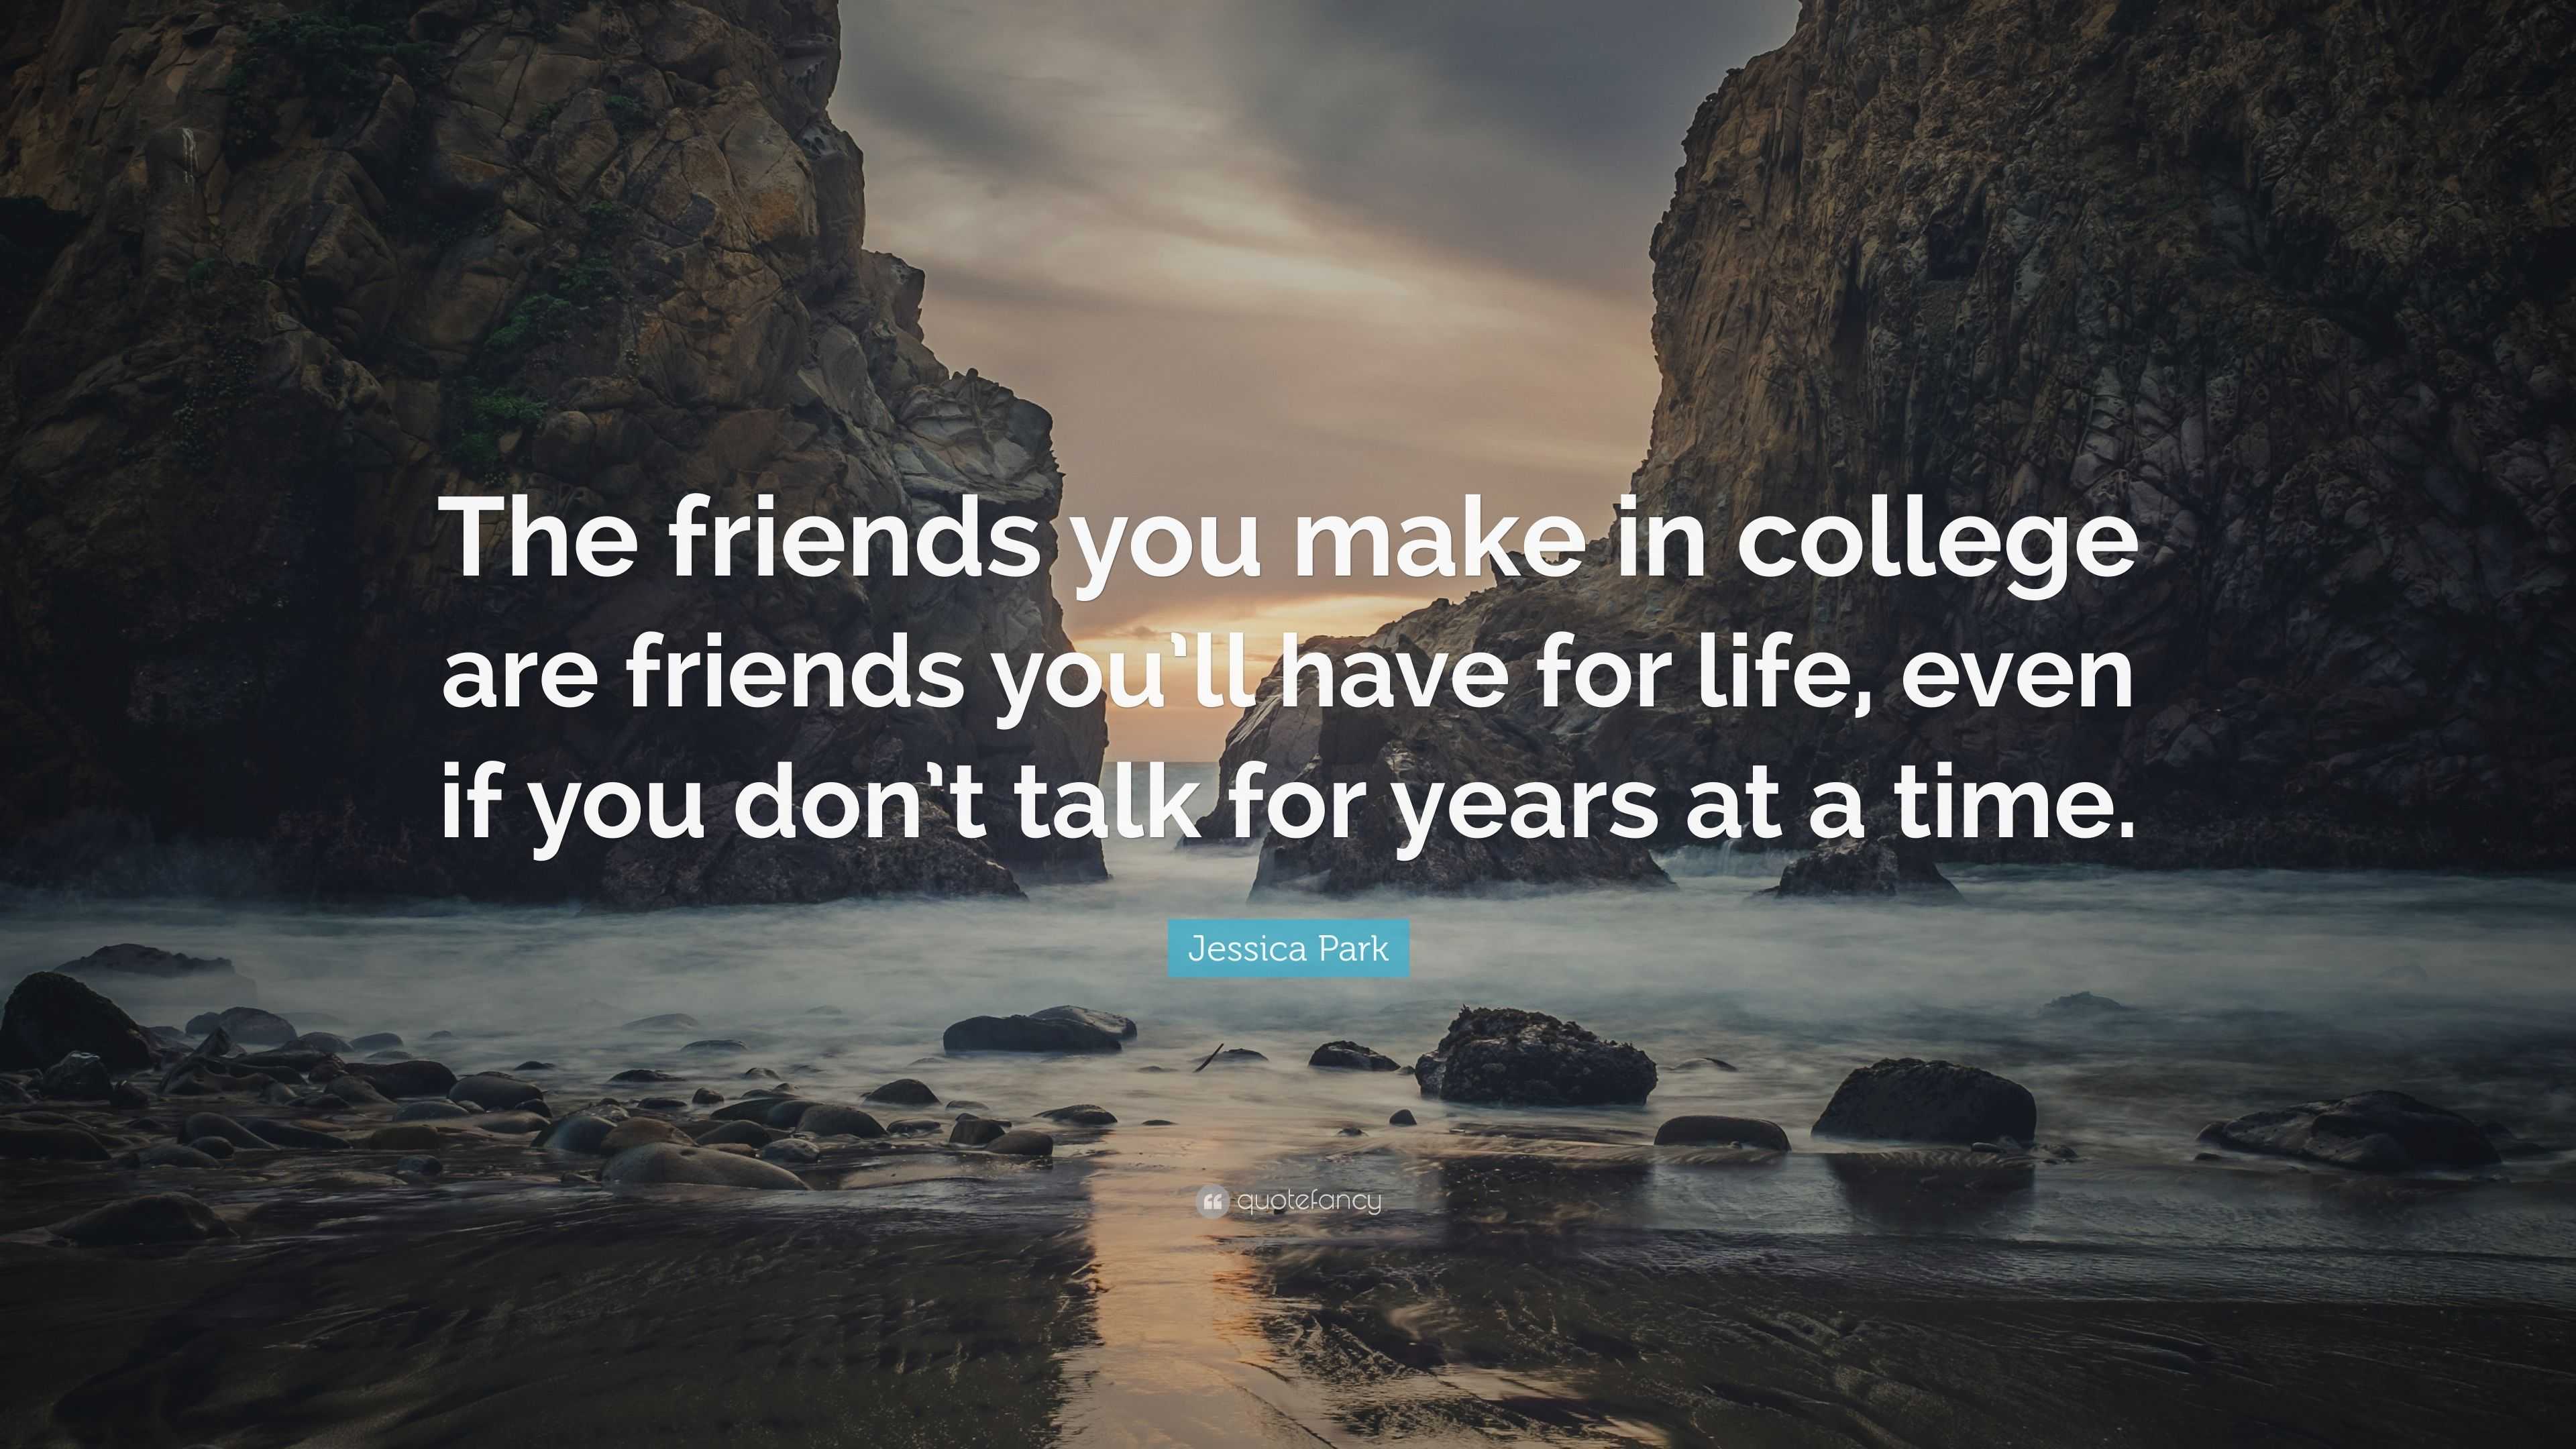 College life friends quotes